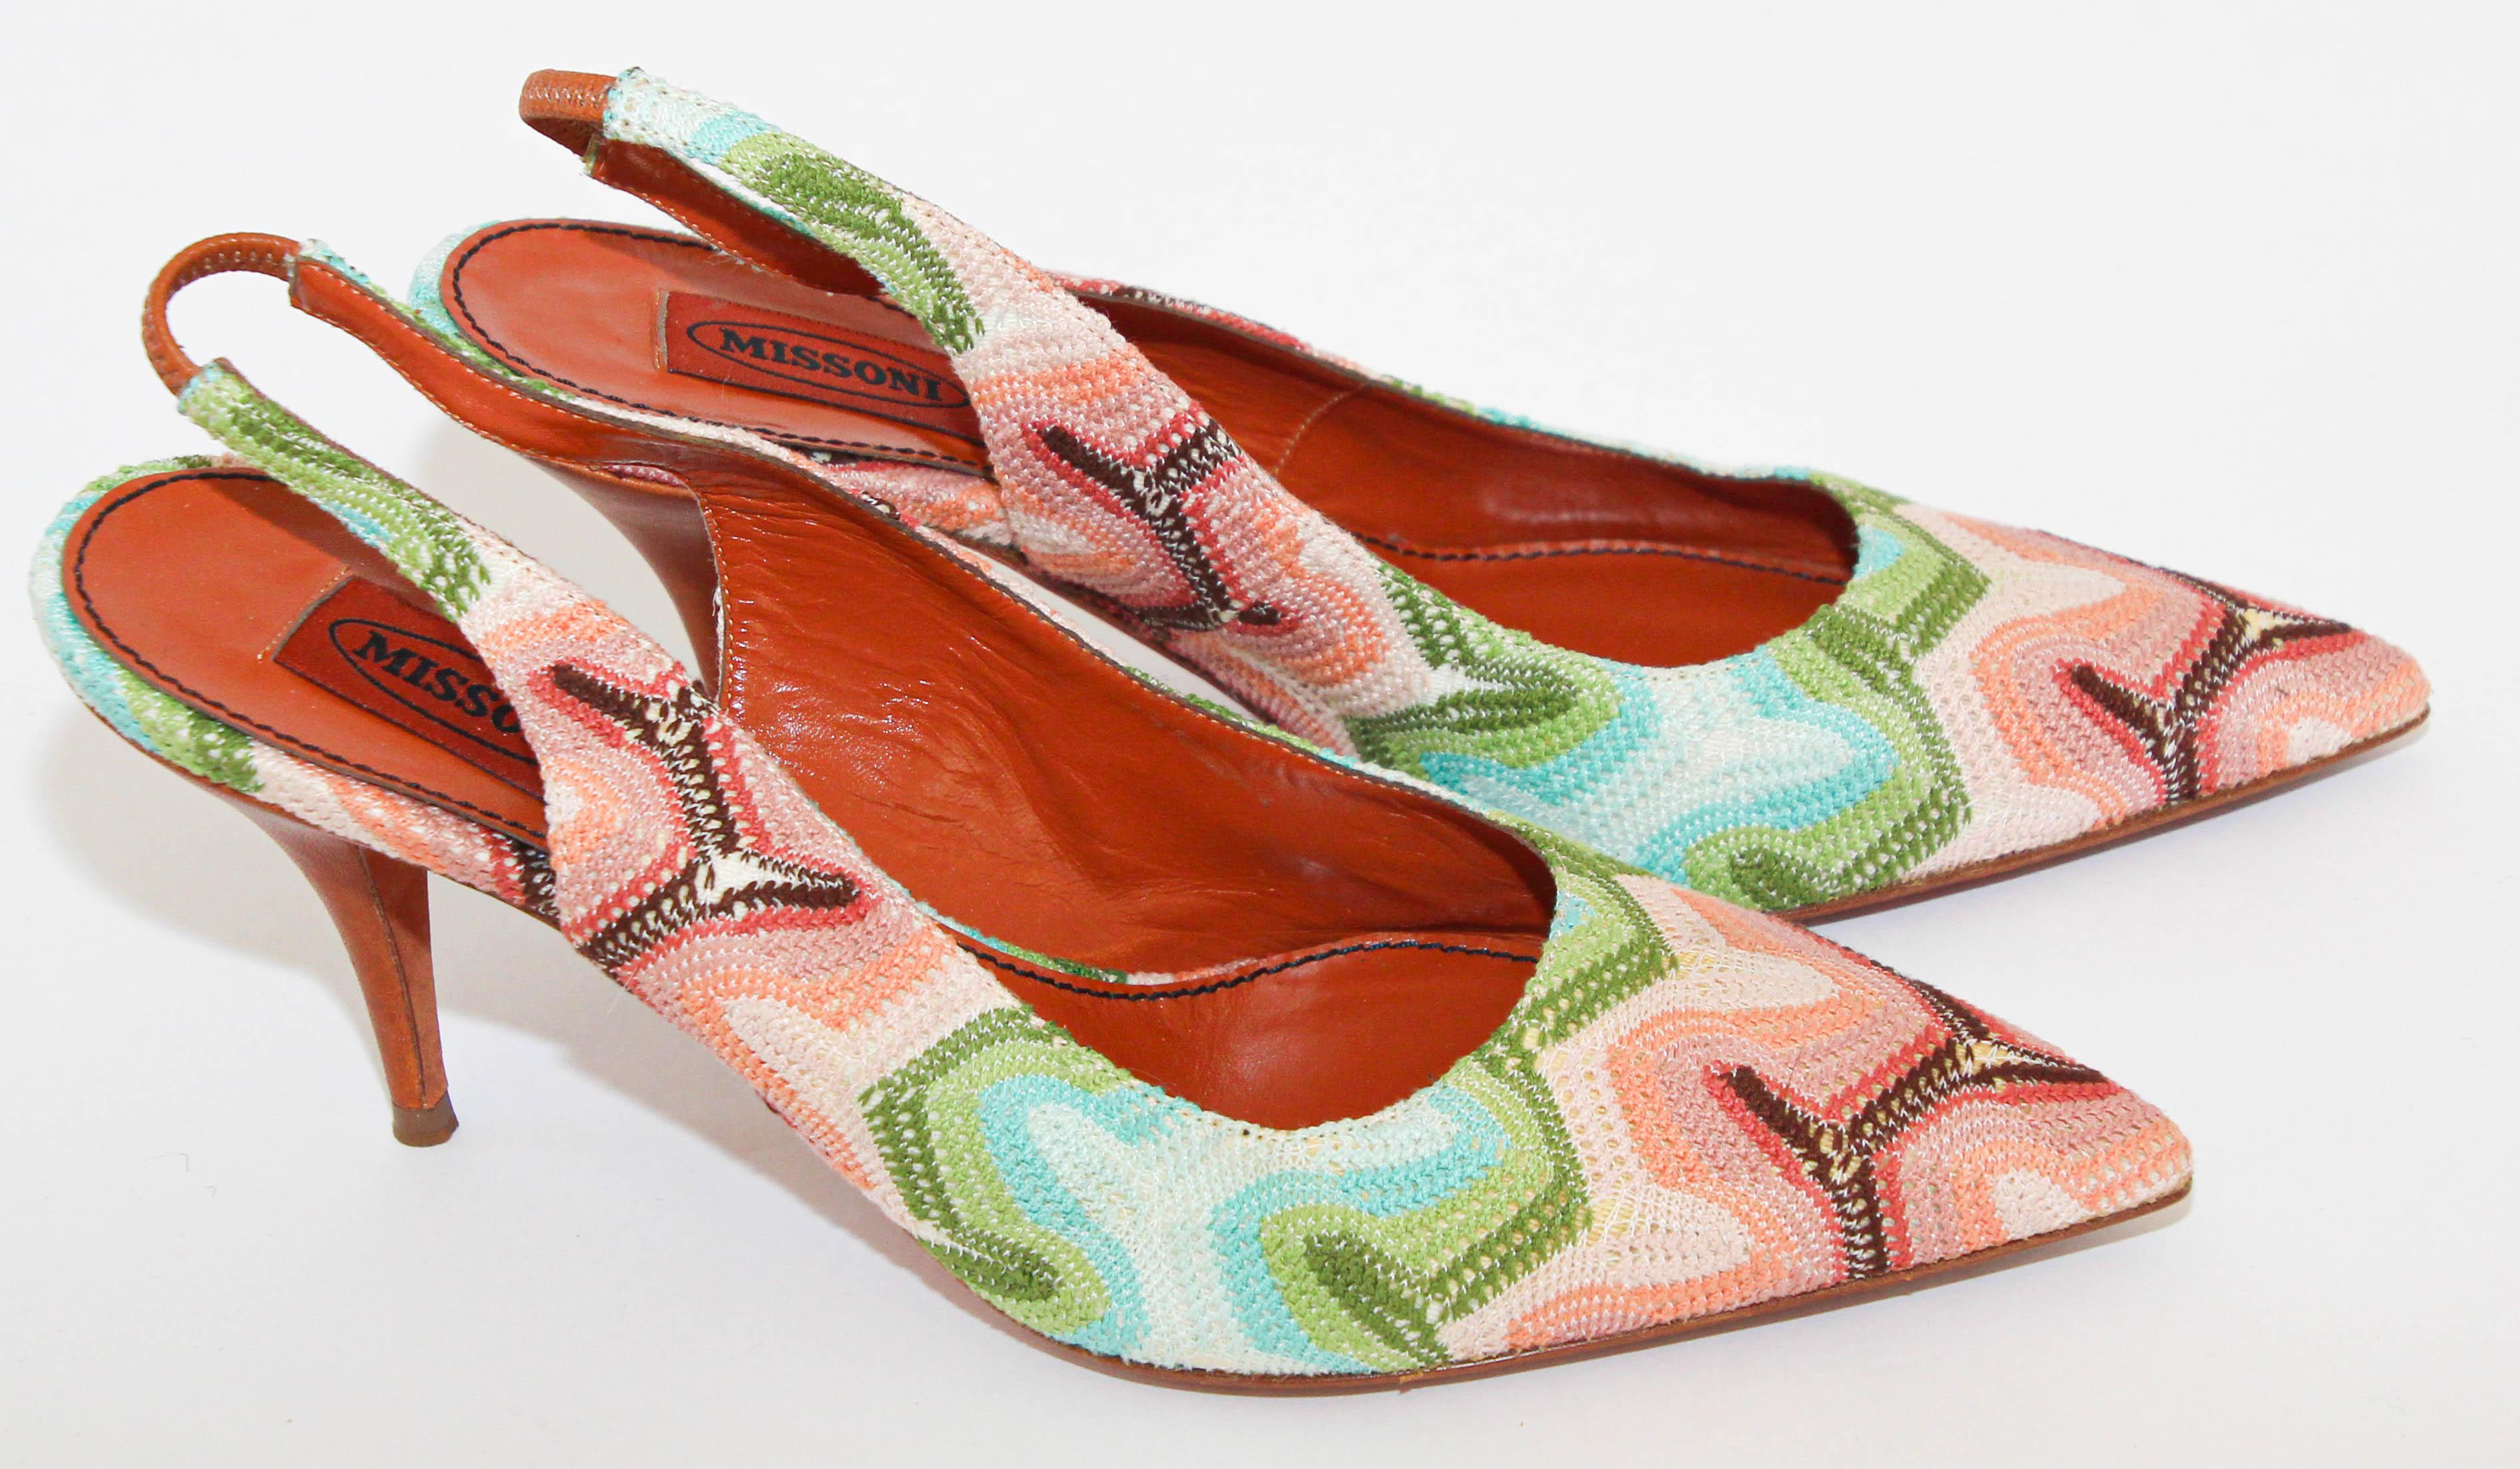 Missoni Slingback Pump.
A stunning Slingback heel pump with endless wearability.
Missoni classic zig zag patterned Slingback heels multicolor.
MISSSONI 90's Multi Colored Knit Printed fabric.
Knit Missoni Signature Zig Zag Pattern Upper With Brown